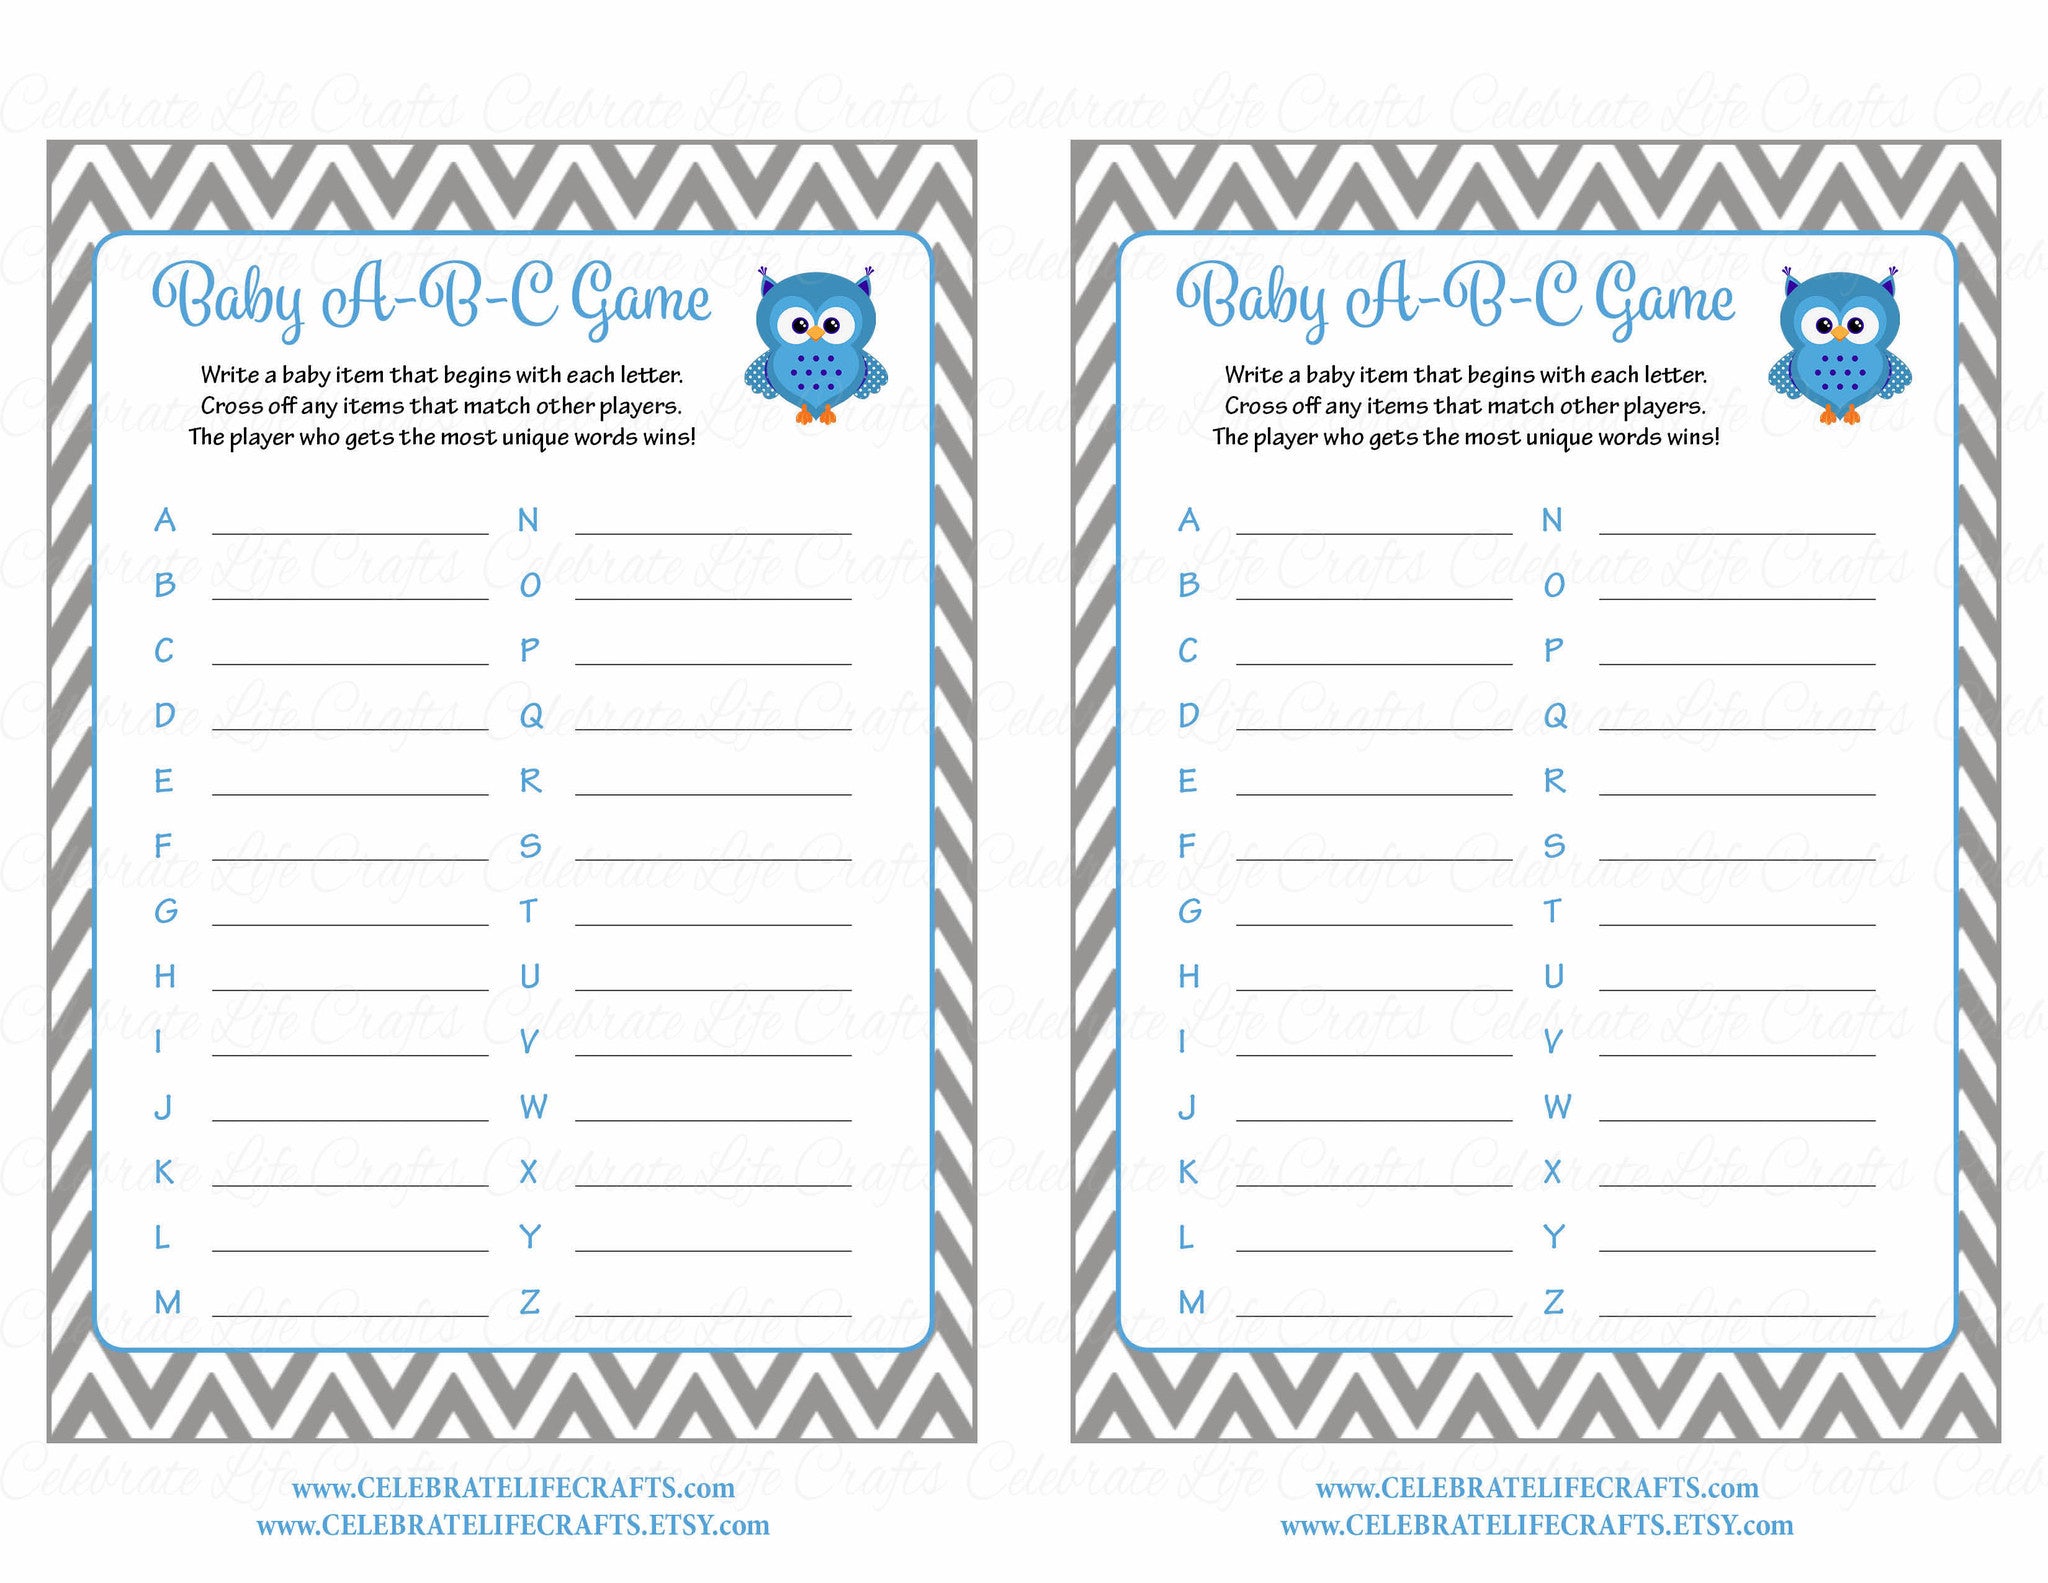 Baby ABC's Baby Shower Game - Owl Baby Shower Theme for Baby Boy - Blue